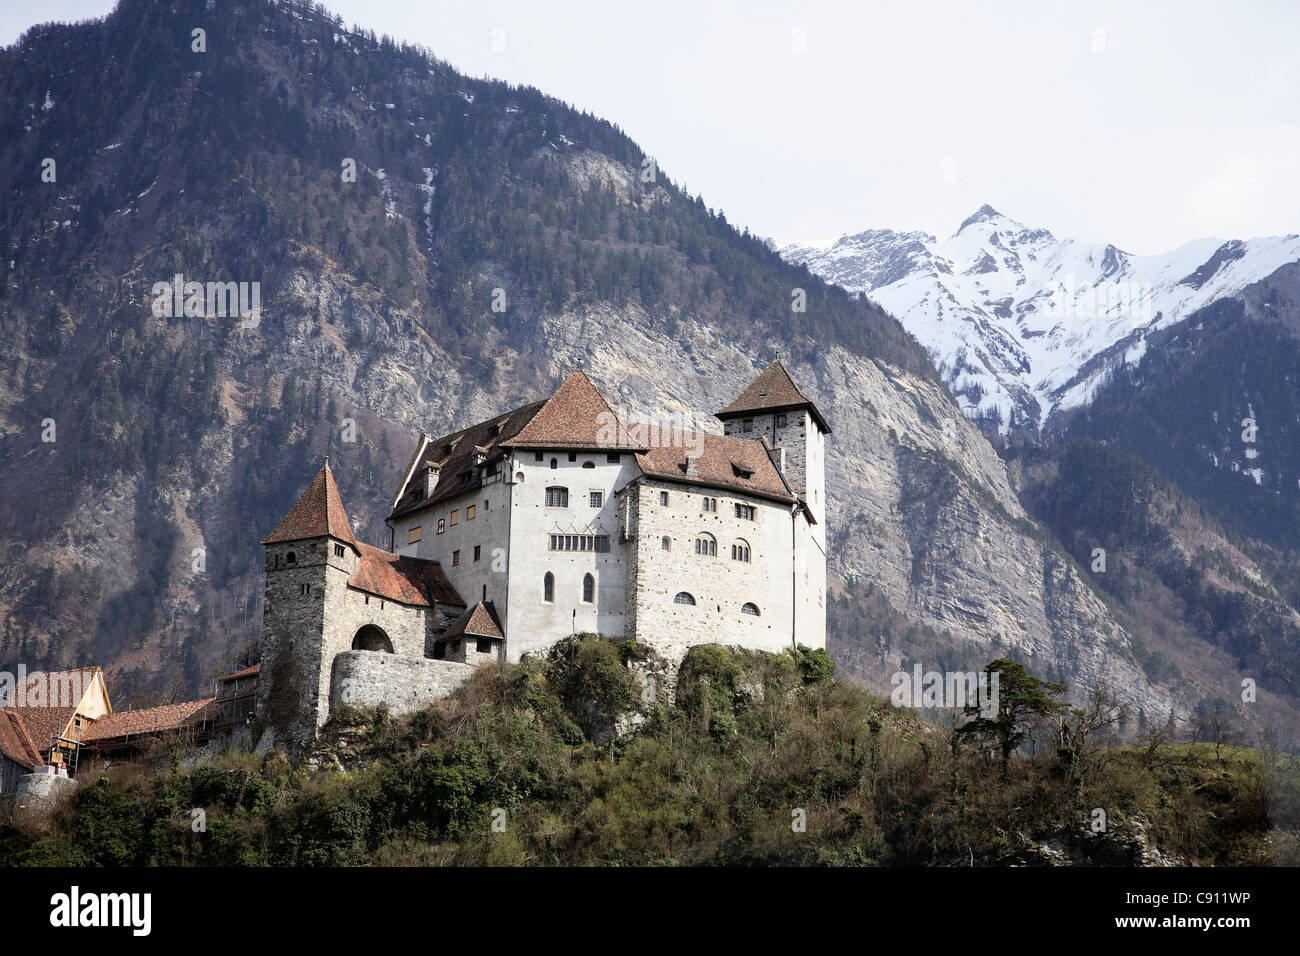 The Principality of Liechtenstein is the smallest German-speaking country in the world. It has a mountainous terrain making it Stock Photo